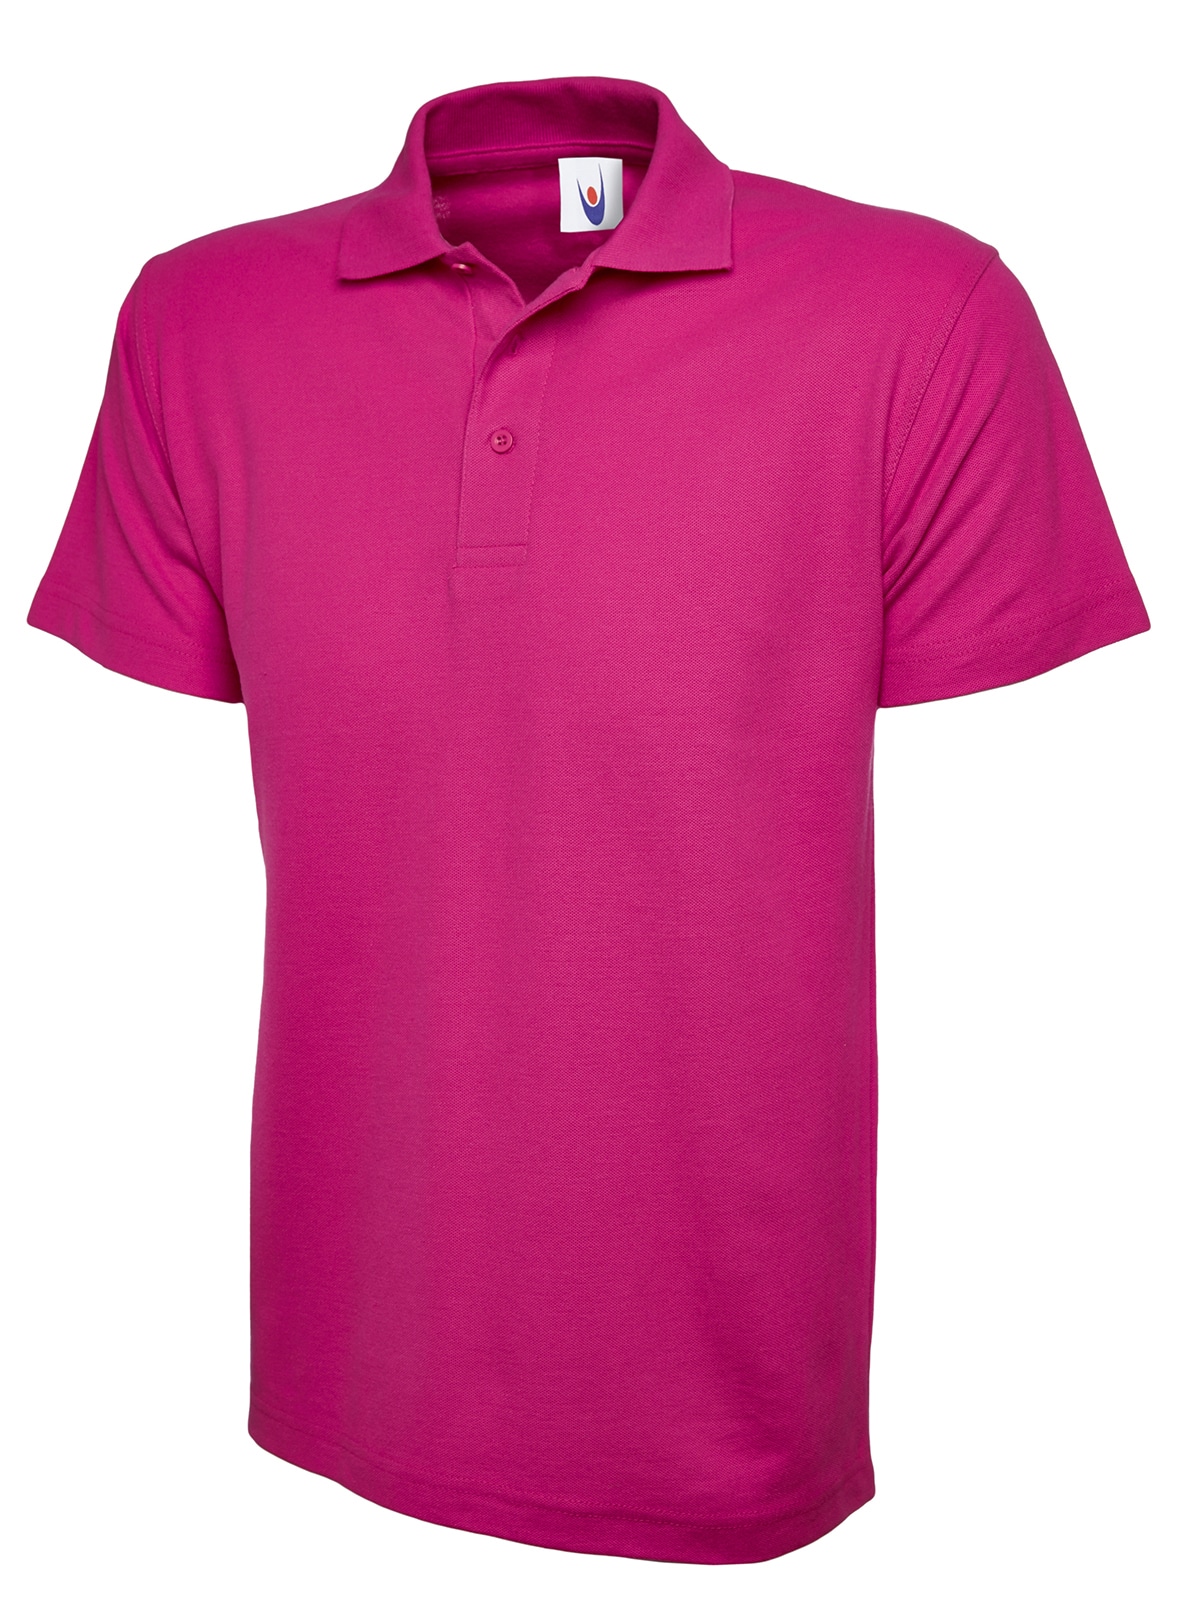 UC101 HOT PINK - Buying custom embroidered polo shirts: Everything you need to know